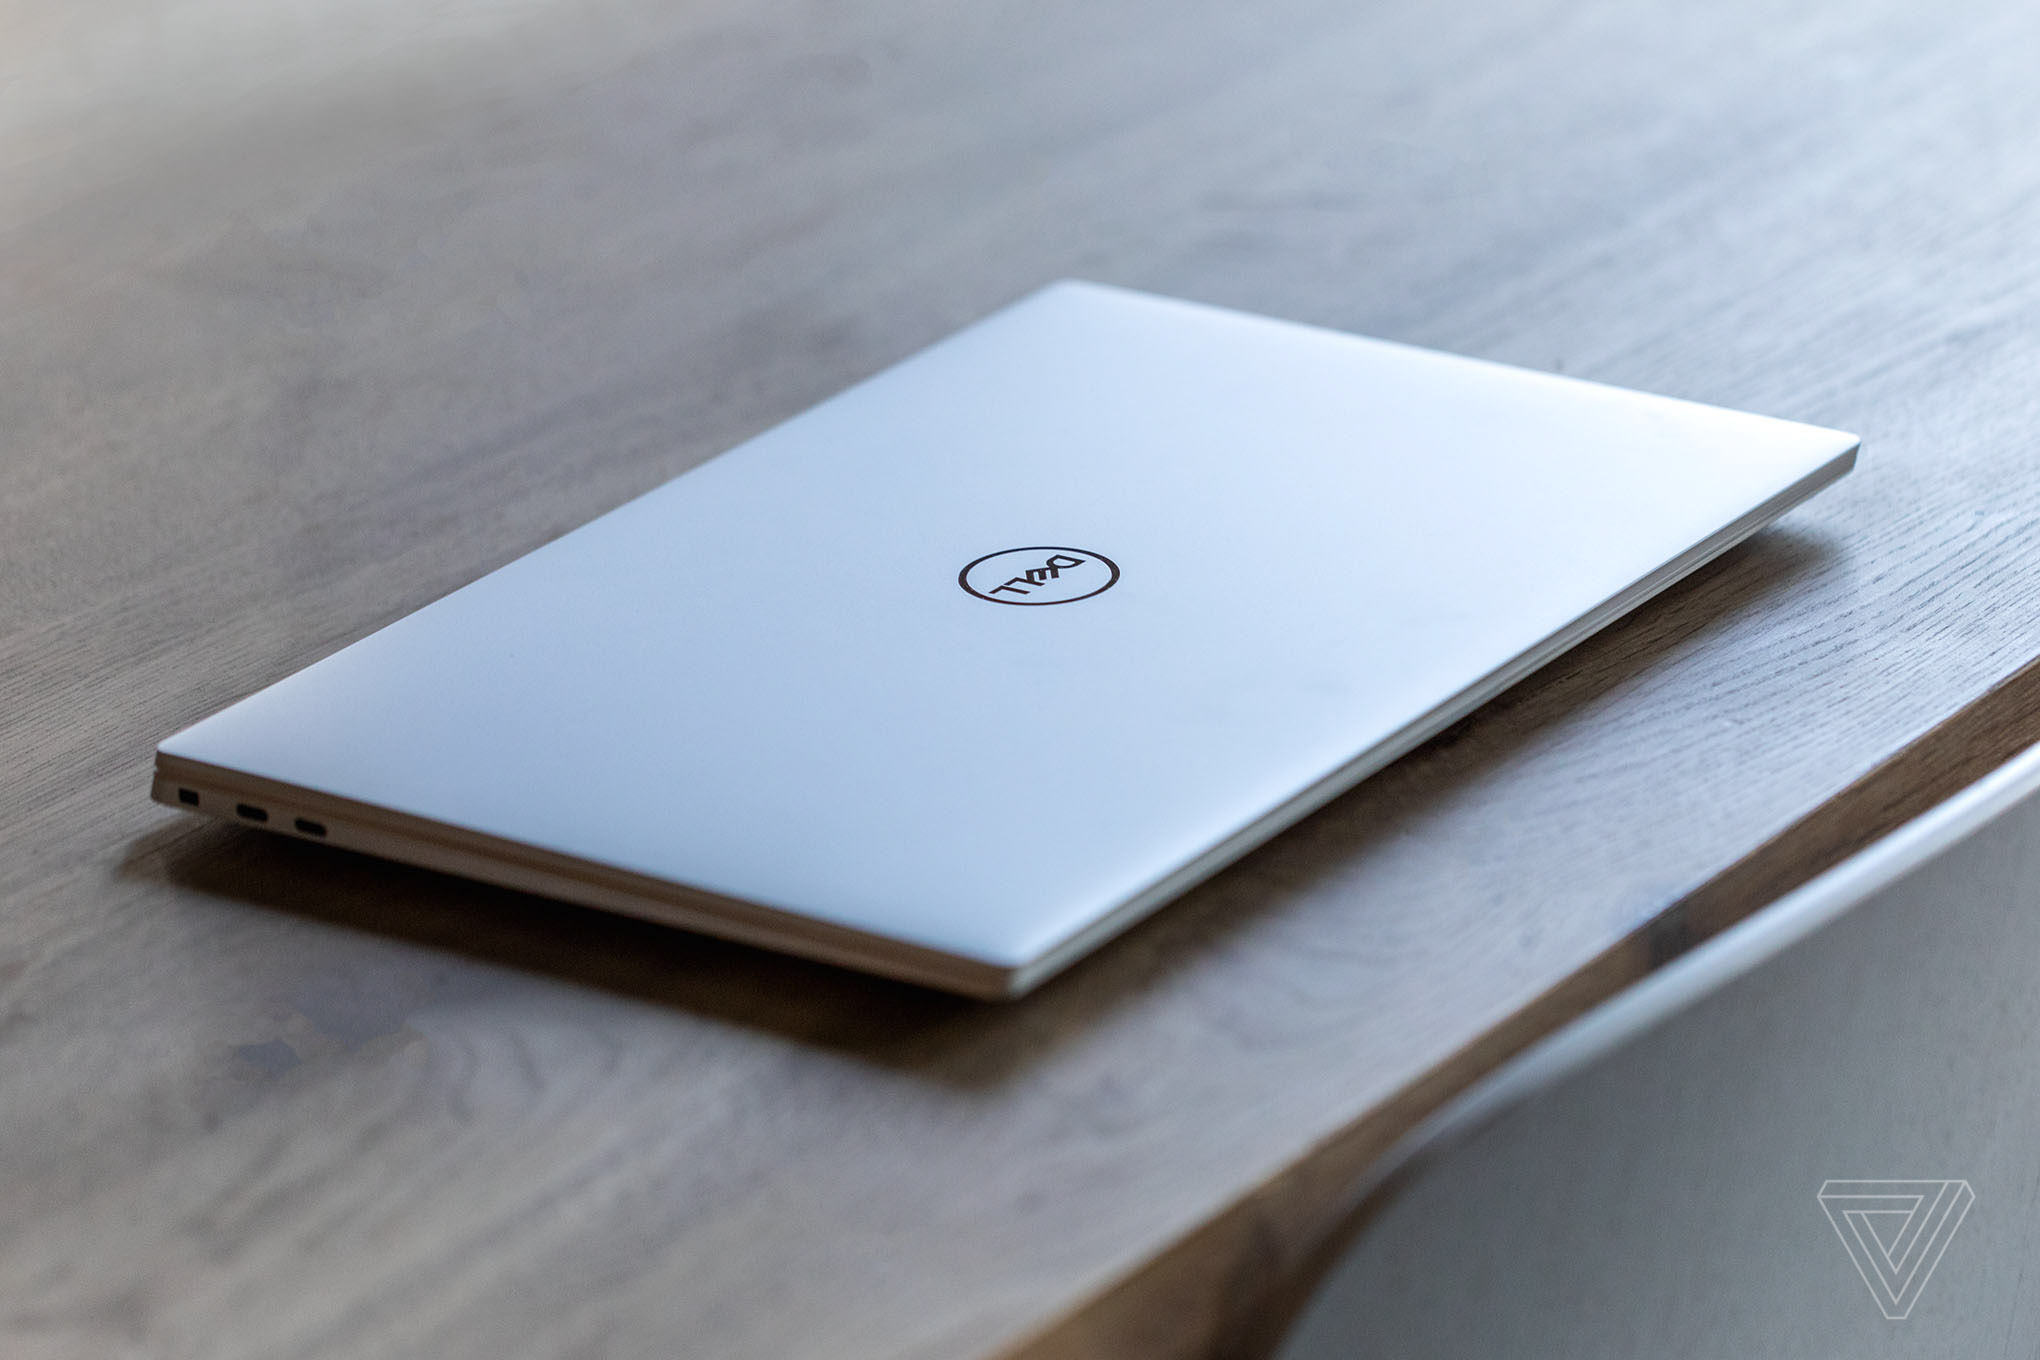 The Dell XPS 15 closed on a wooden table.